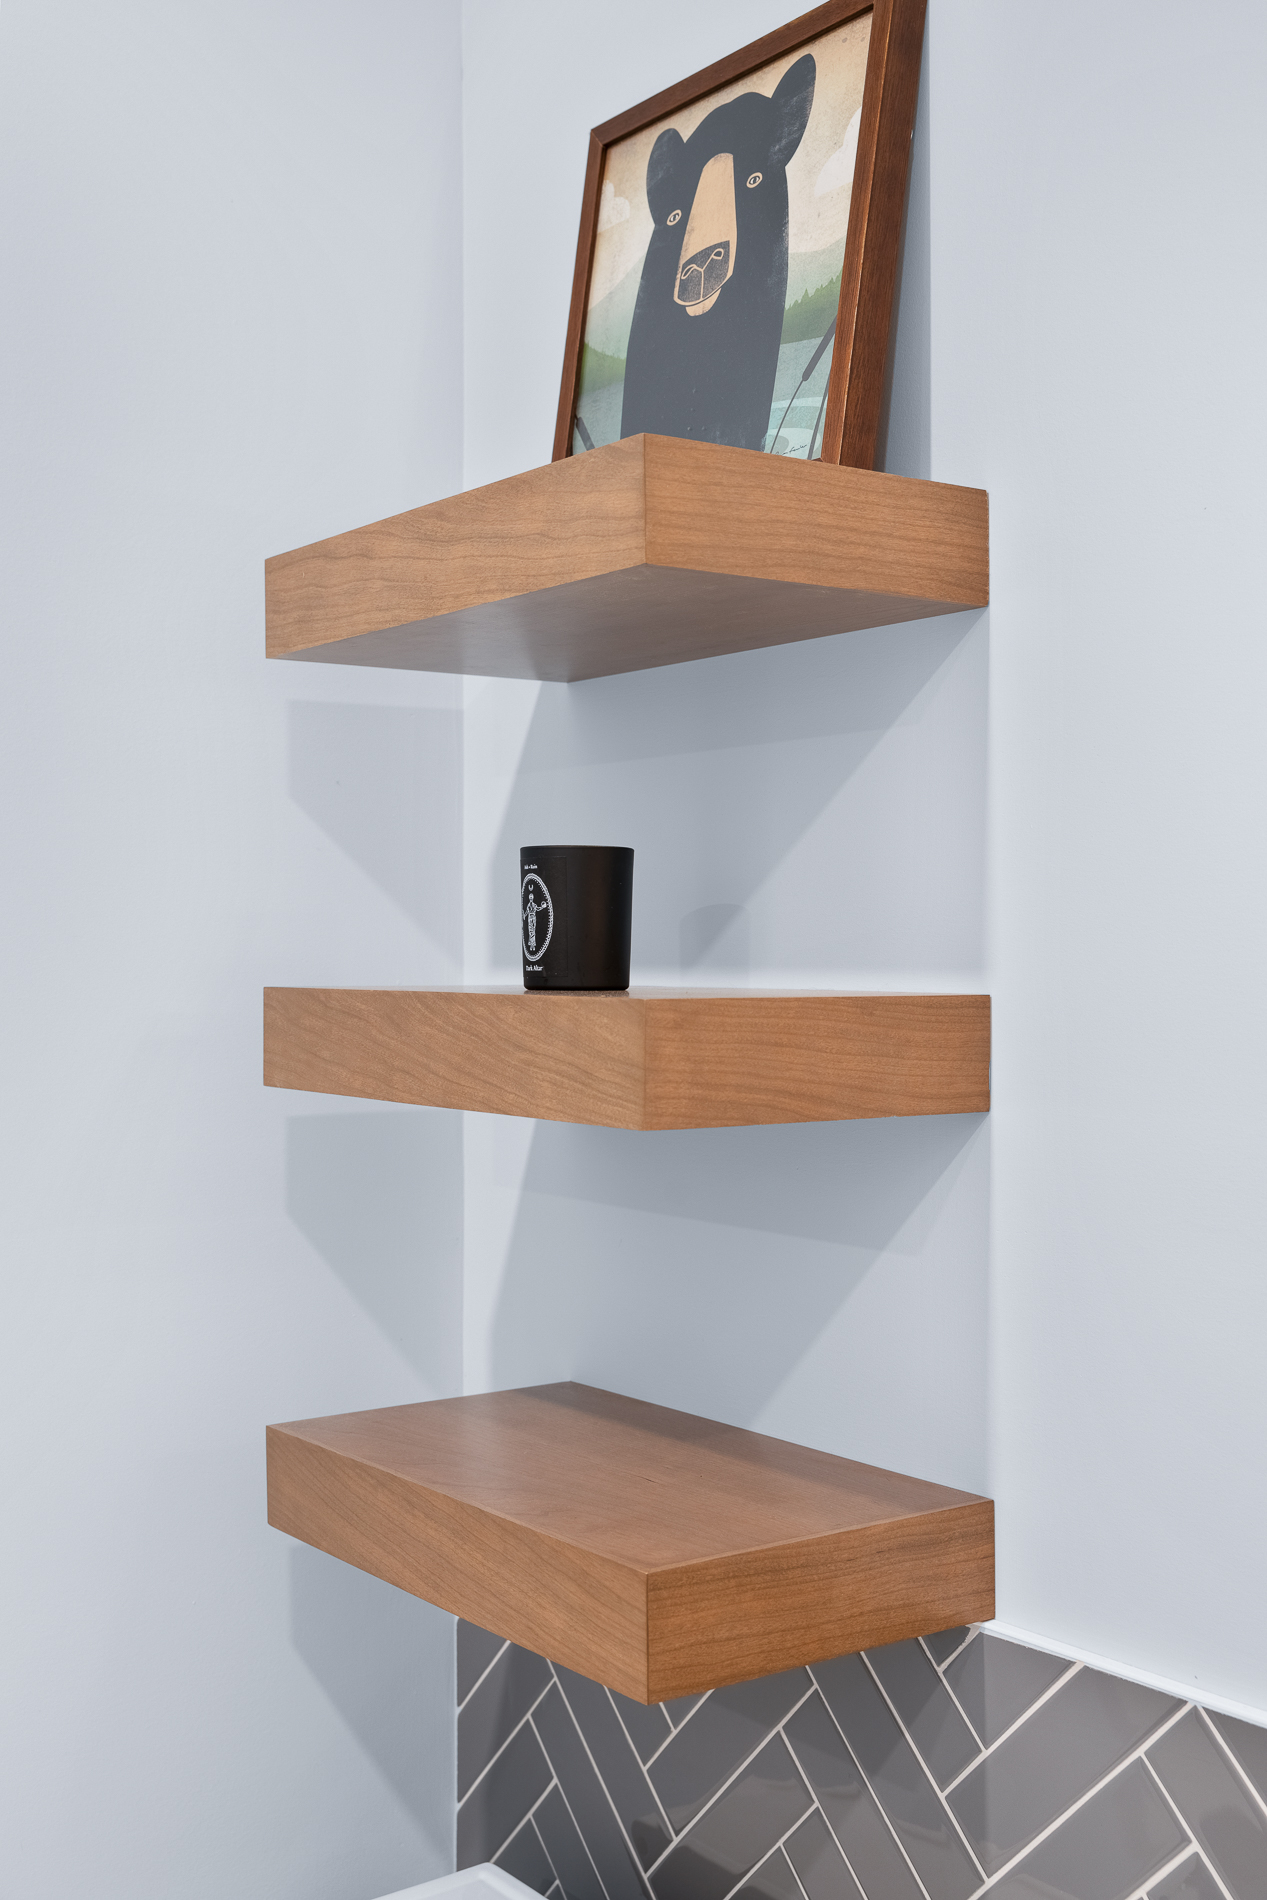 Three Wooden Shelves from a Contemporary Home Design